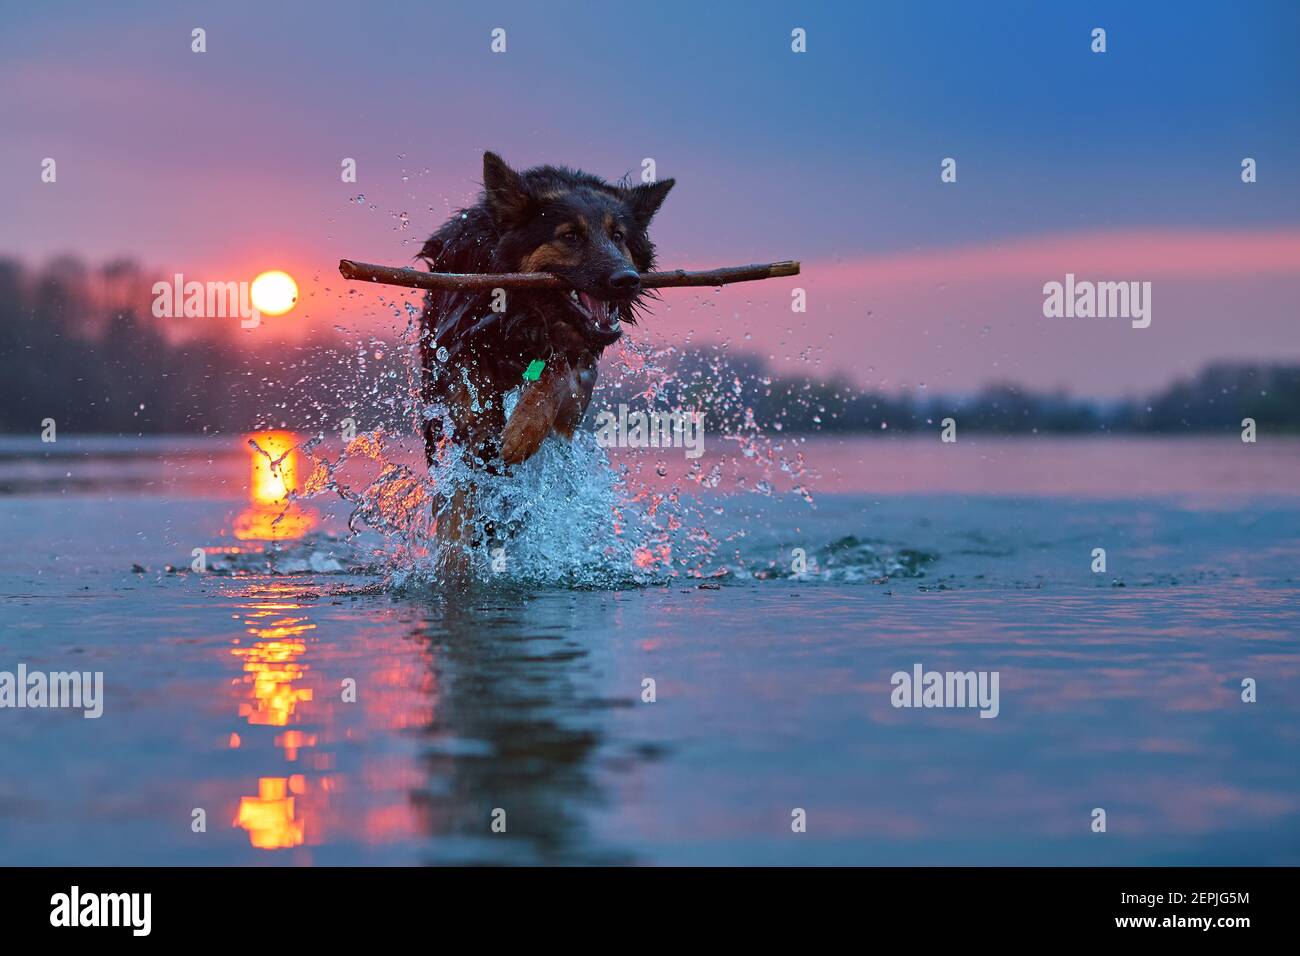 Swimming dog against setting sun. Direct view on Bohemian shepherd, purebred. Dog in the water, retrieving a stick. Low angle photo. Stock Photo